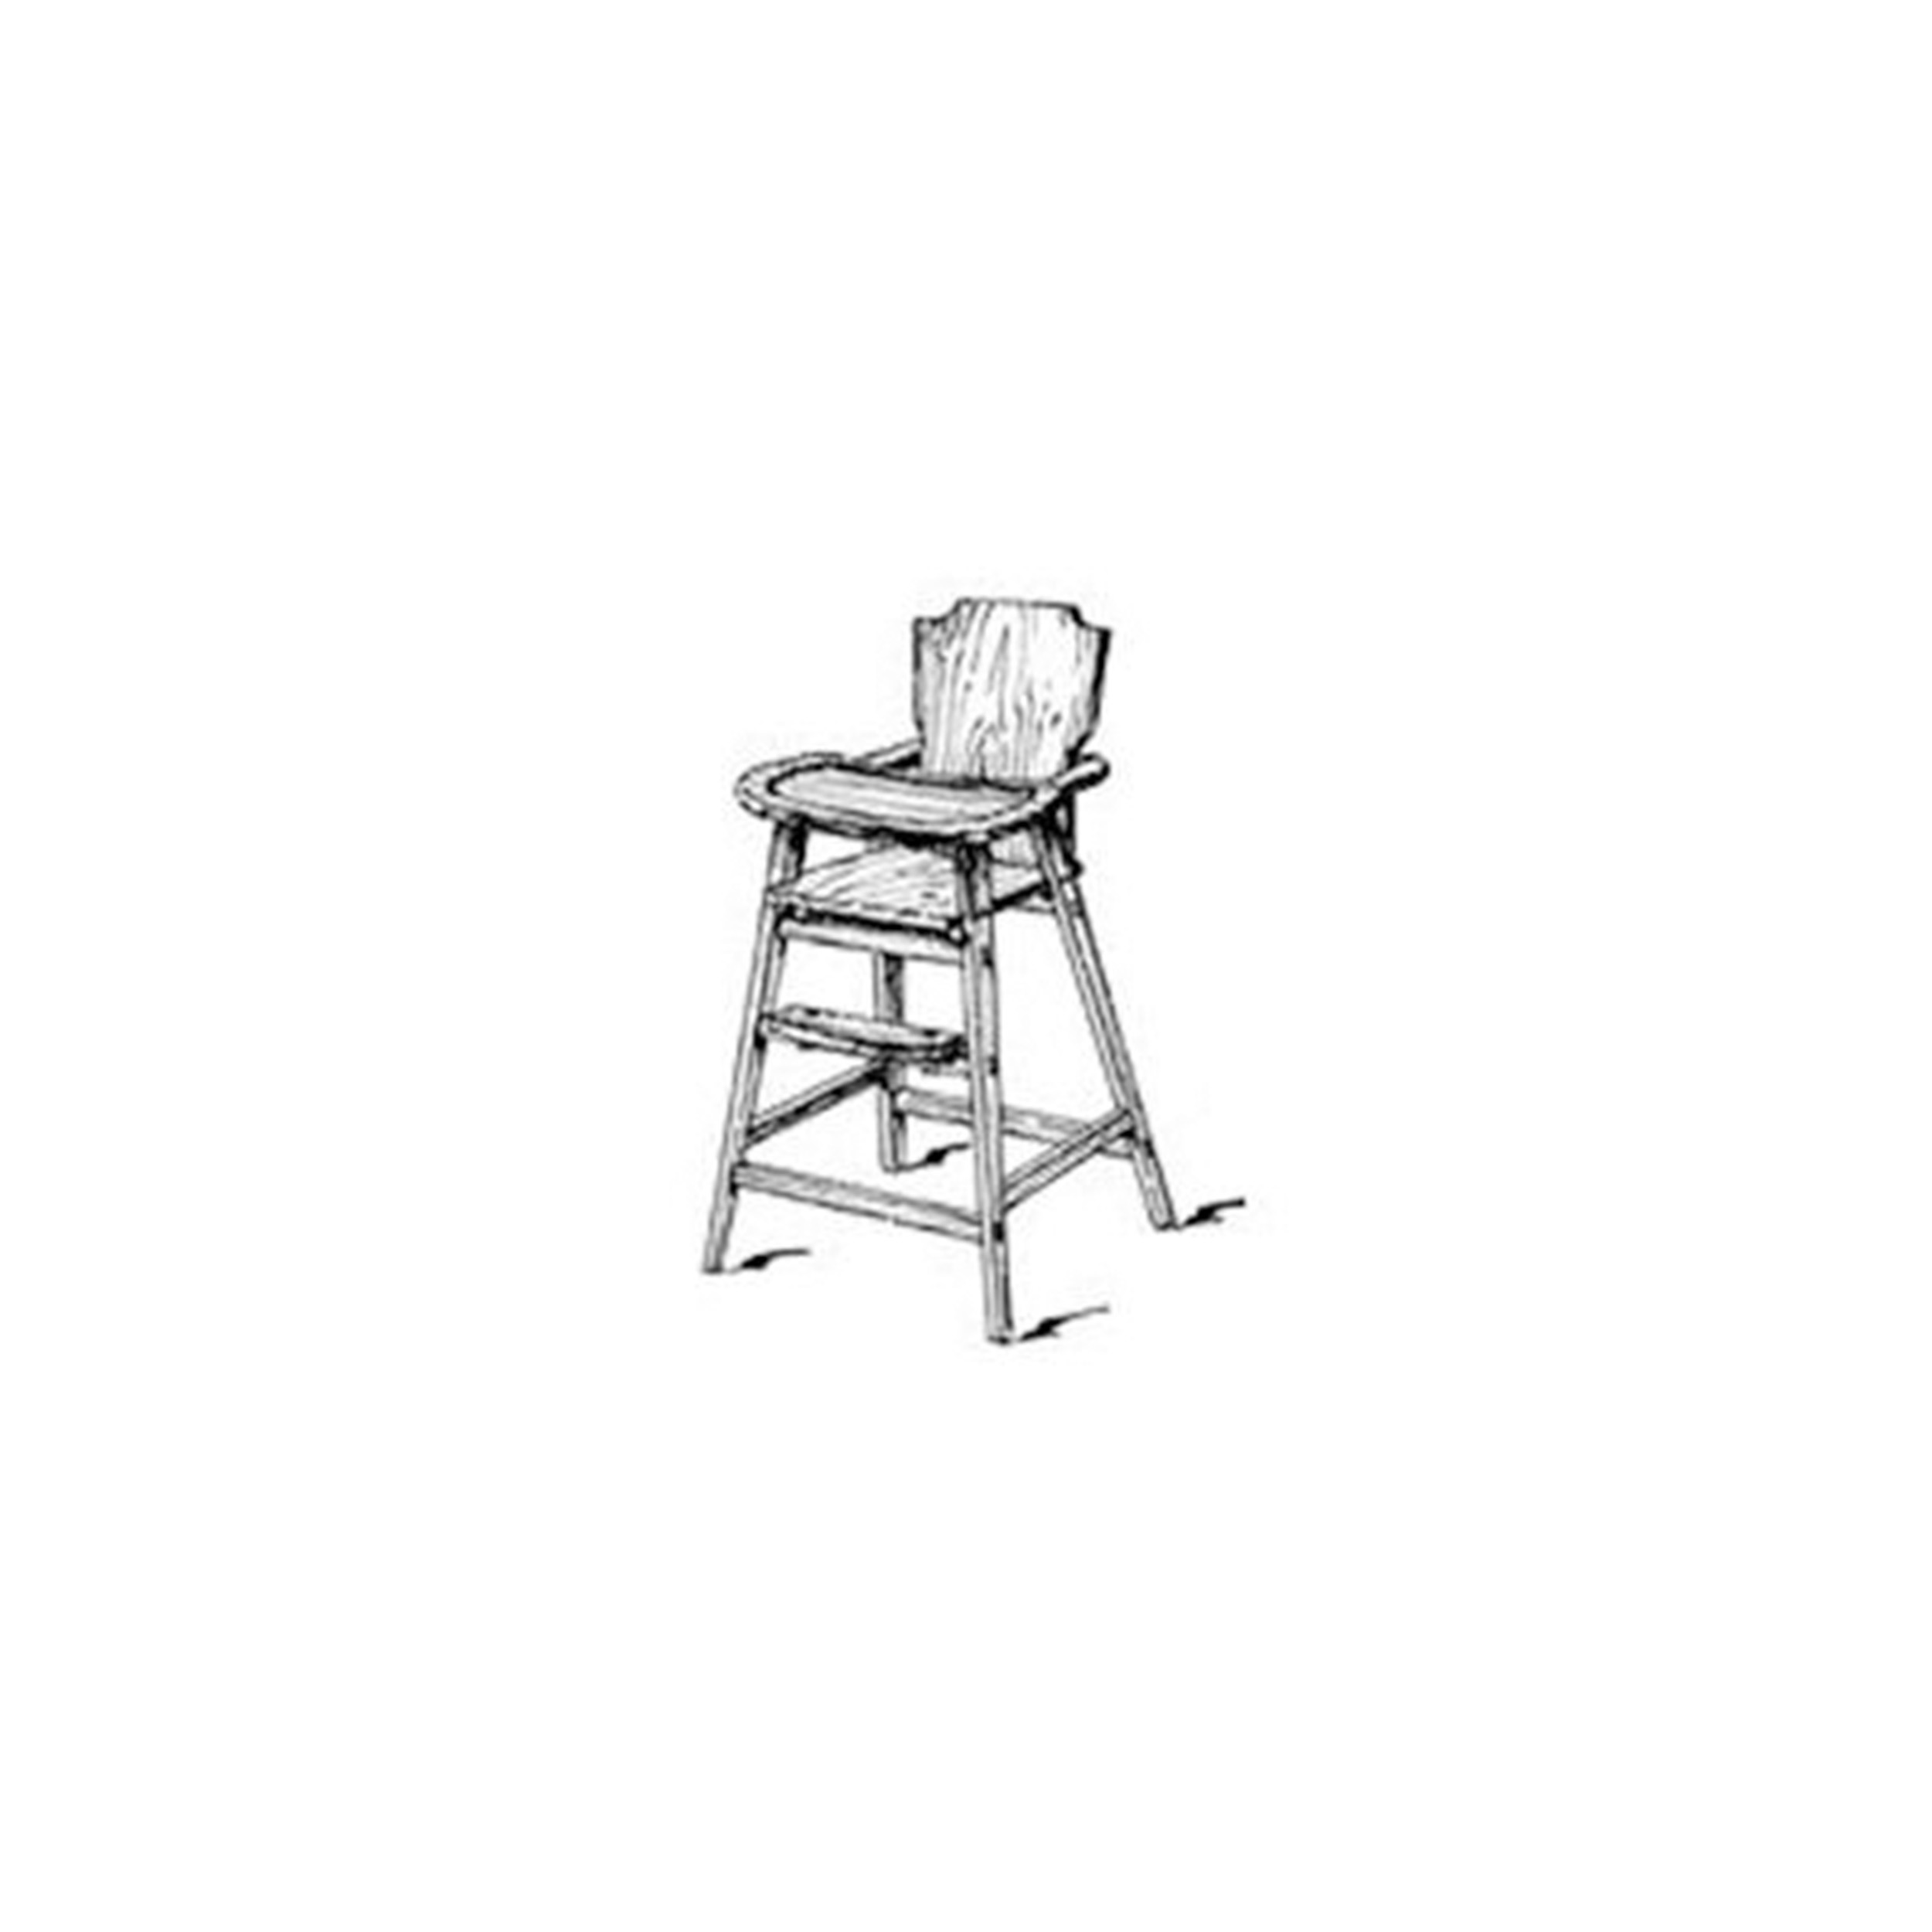 Woodworking Project Paper Plan To Build 60's Era High Chair